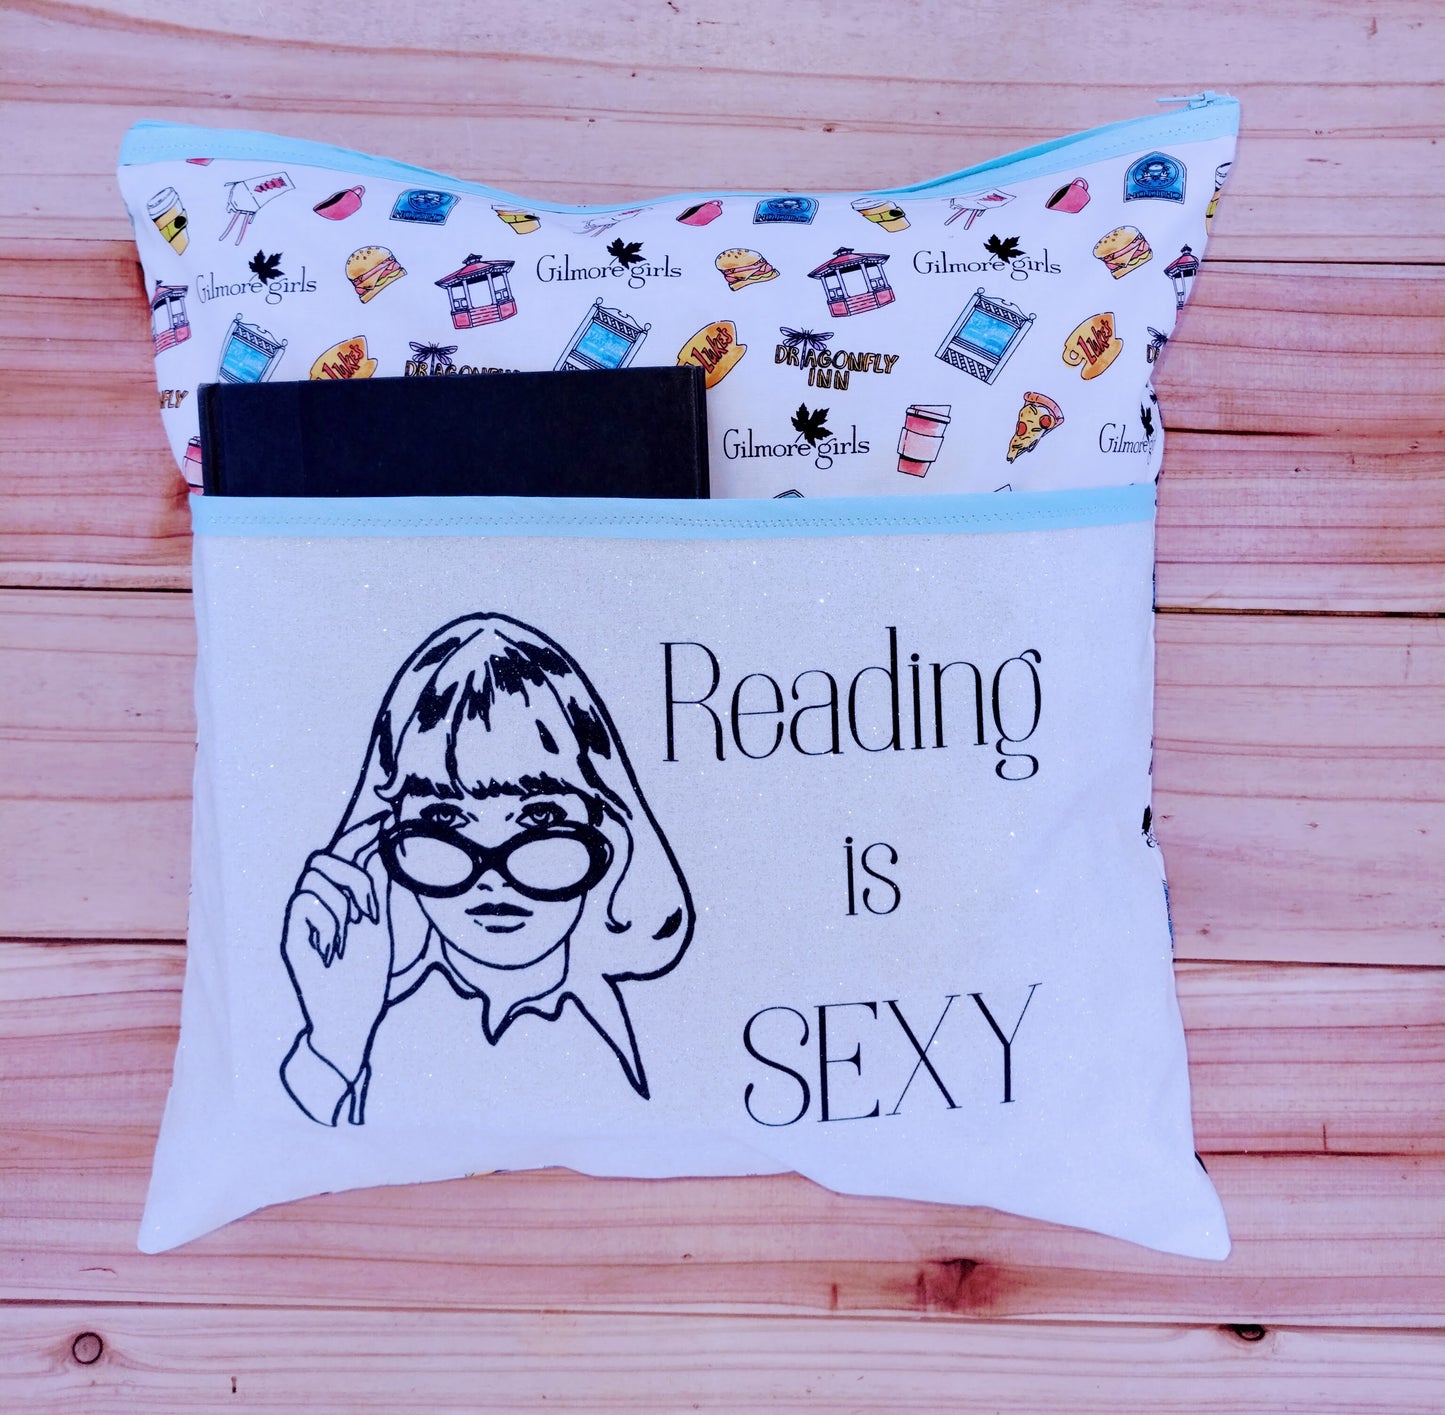 Gilmore Girls reading is sexy reading pillow